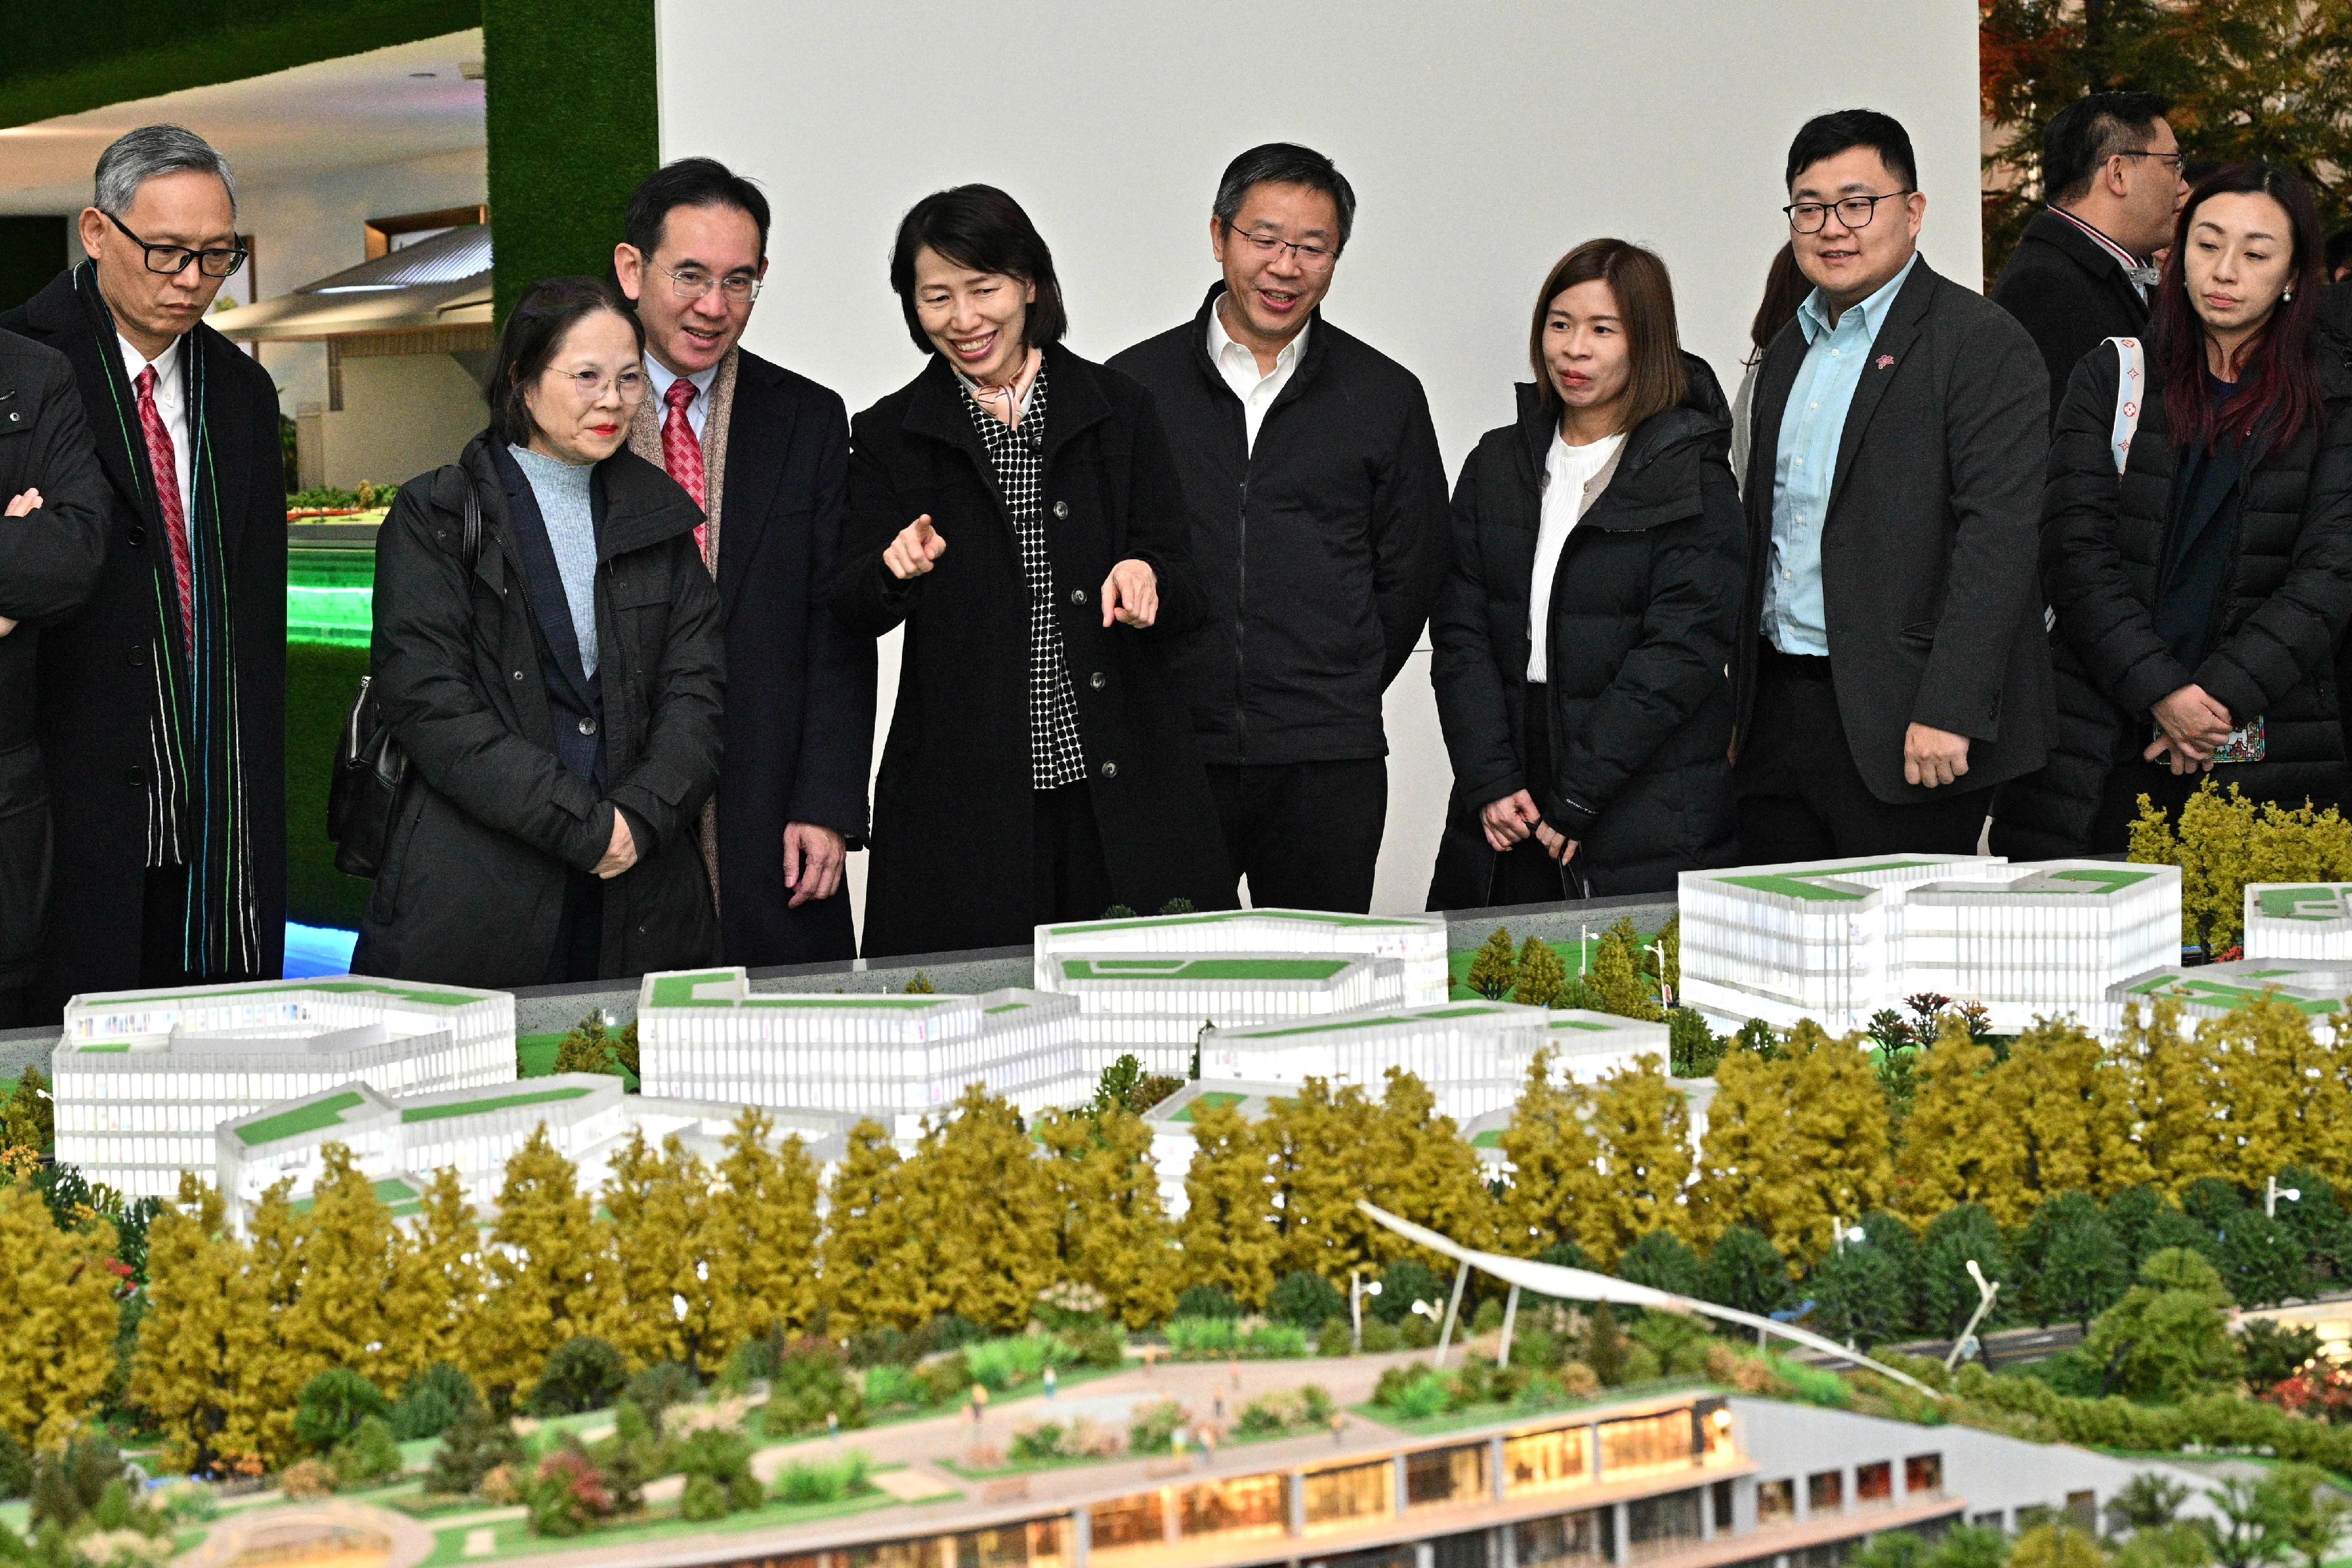 The delegation of politically appointed officials on a national studies programme and duty visit led by the Director of the Chief Executive's Office, Ms Carol Yip (fourth left), today (November 24) visited an eco-tech island project in Nanjing.